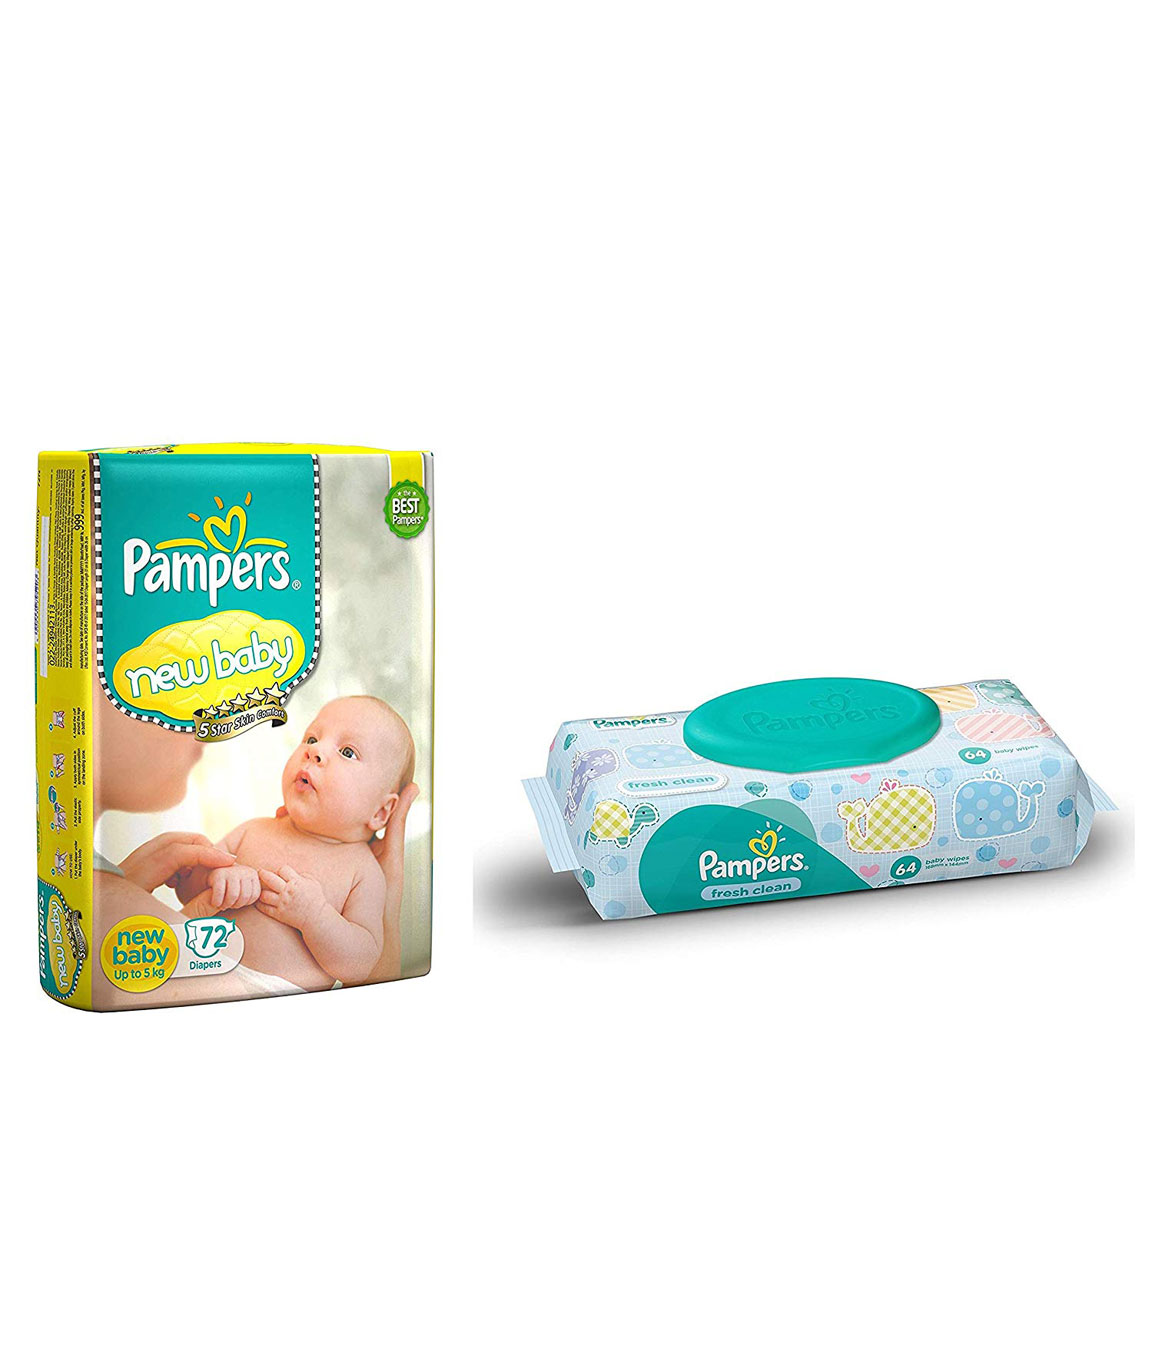 Pampers new baby (72 count)